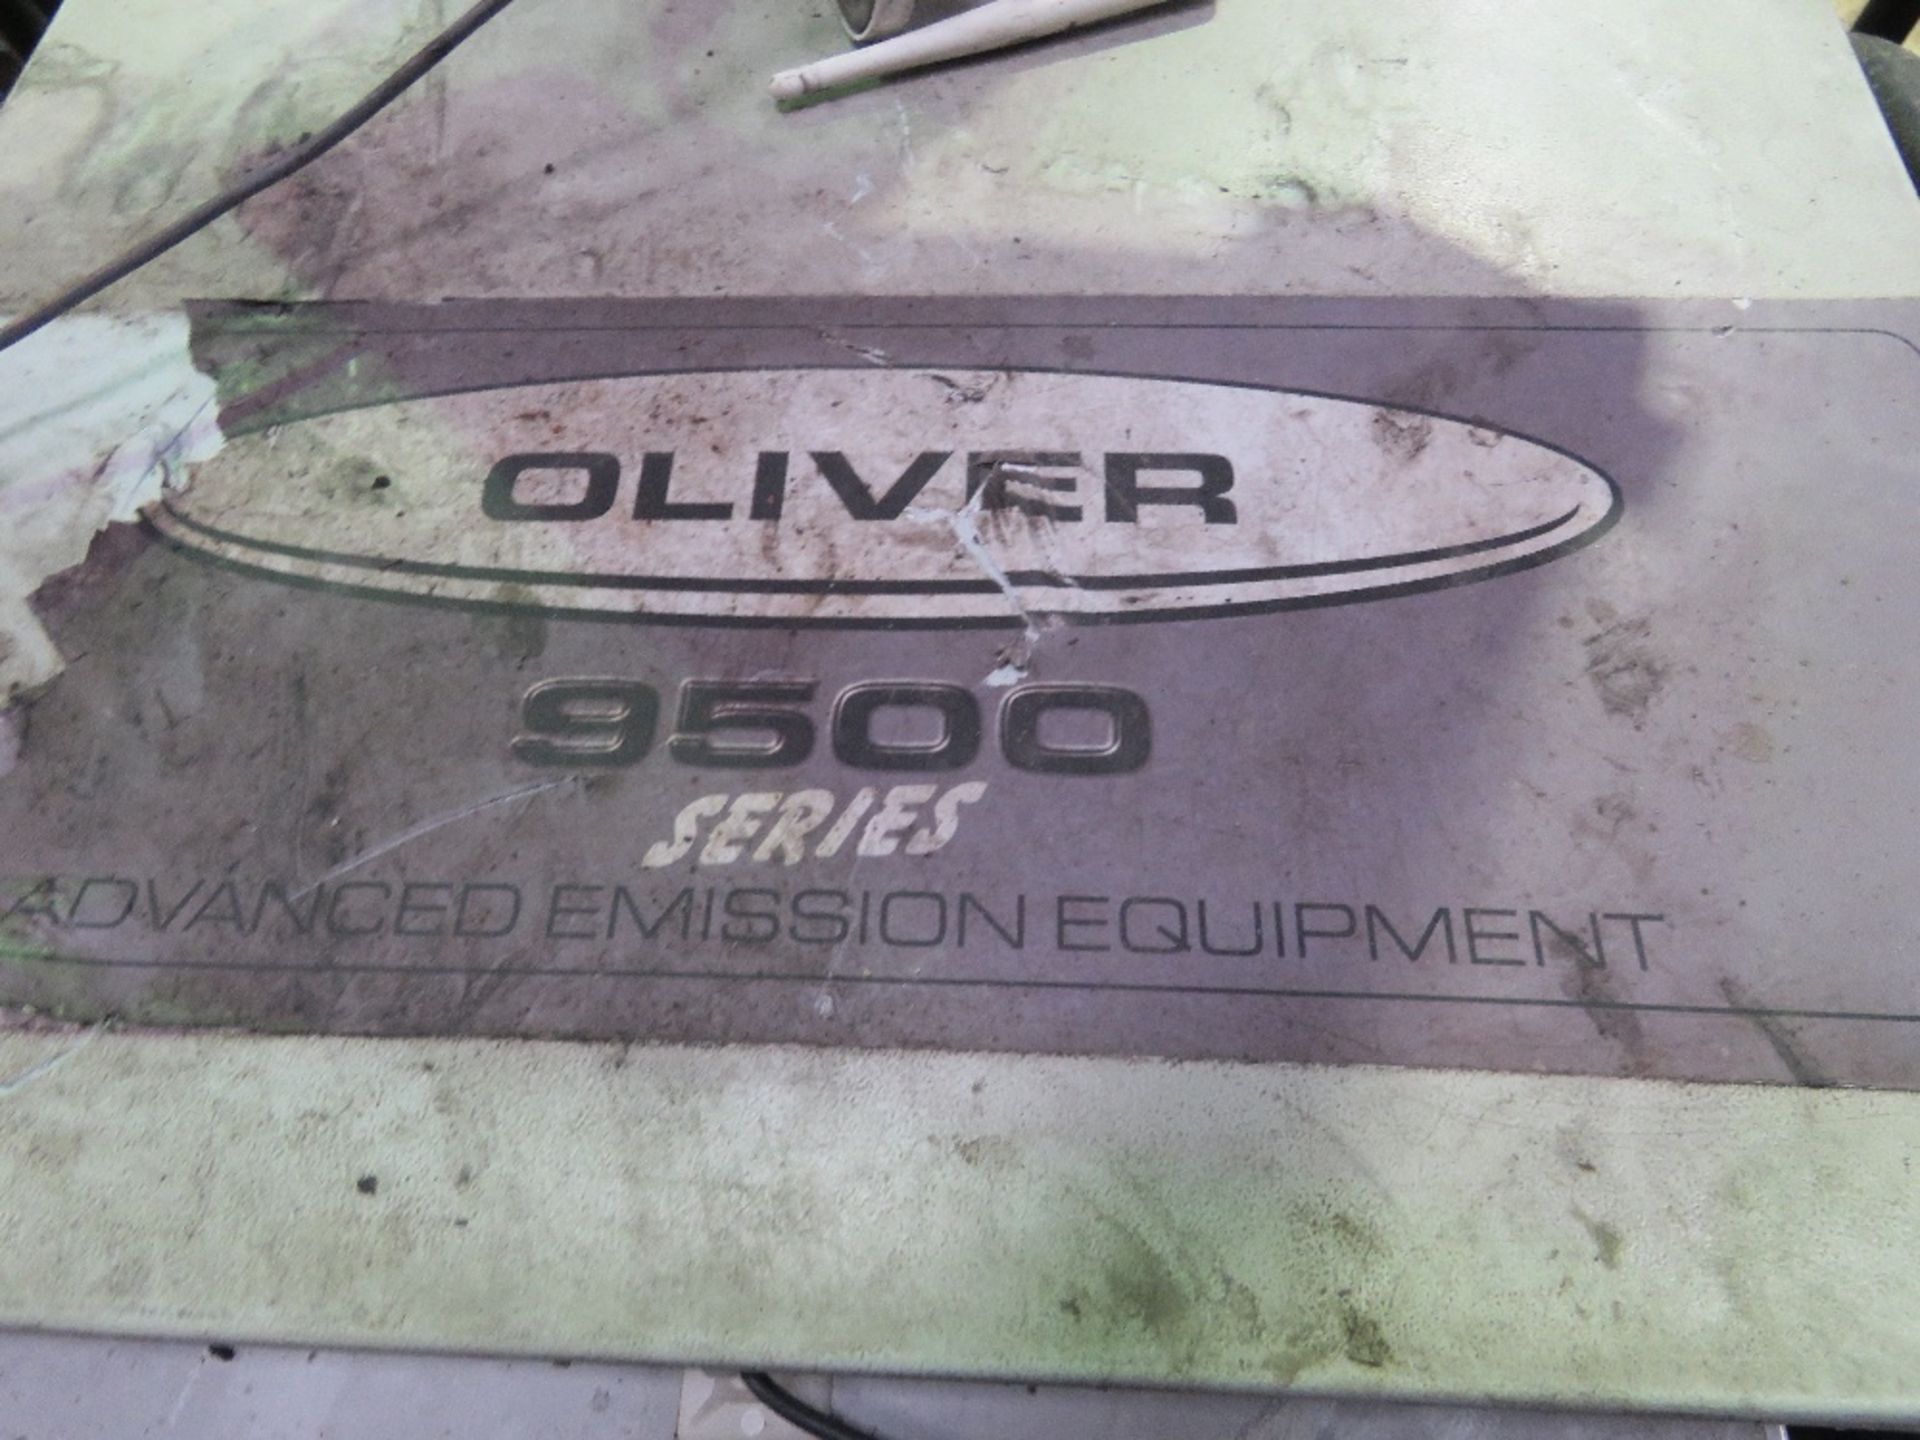 OLIVER 9500 SERIES VEHICLE EMMISSION TESTER. SOURCED FROM GARAGE COMPANY LIQUIDATION. - Image 10 of 10